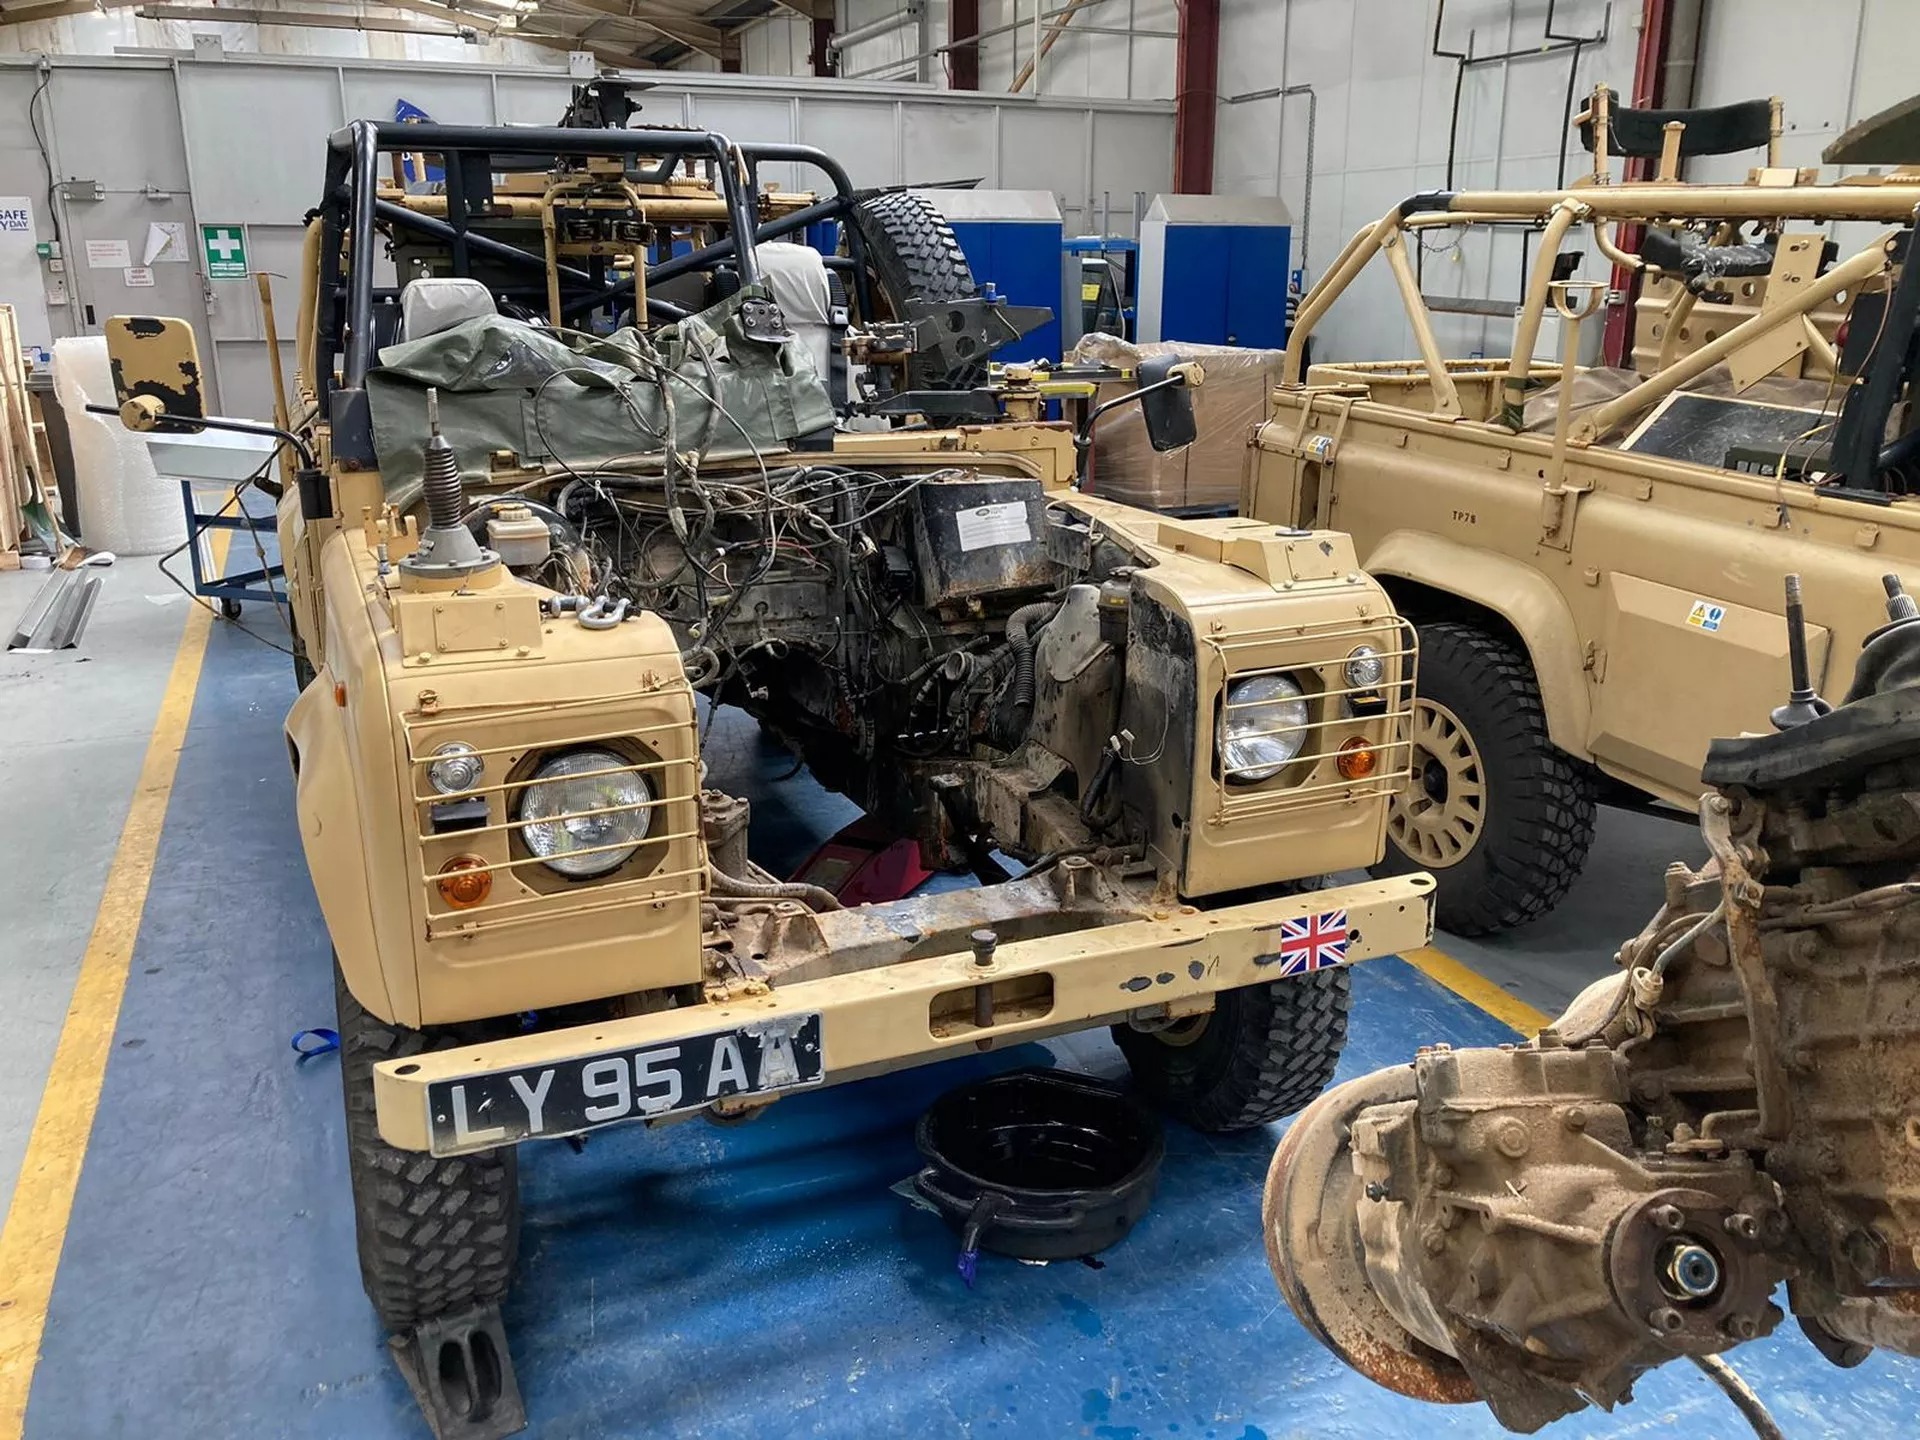 Lurcher 2 - British Army's Lurcher Project: Converting Military Land Rovers into Electric Vehicles